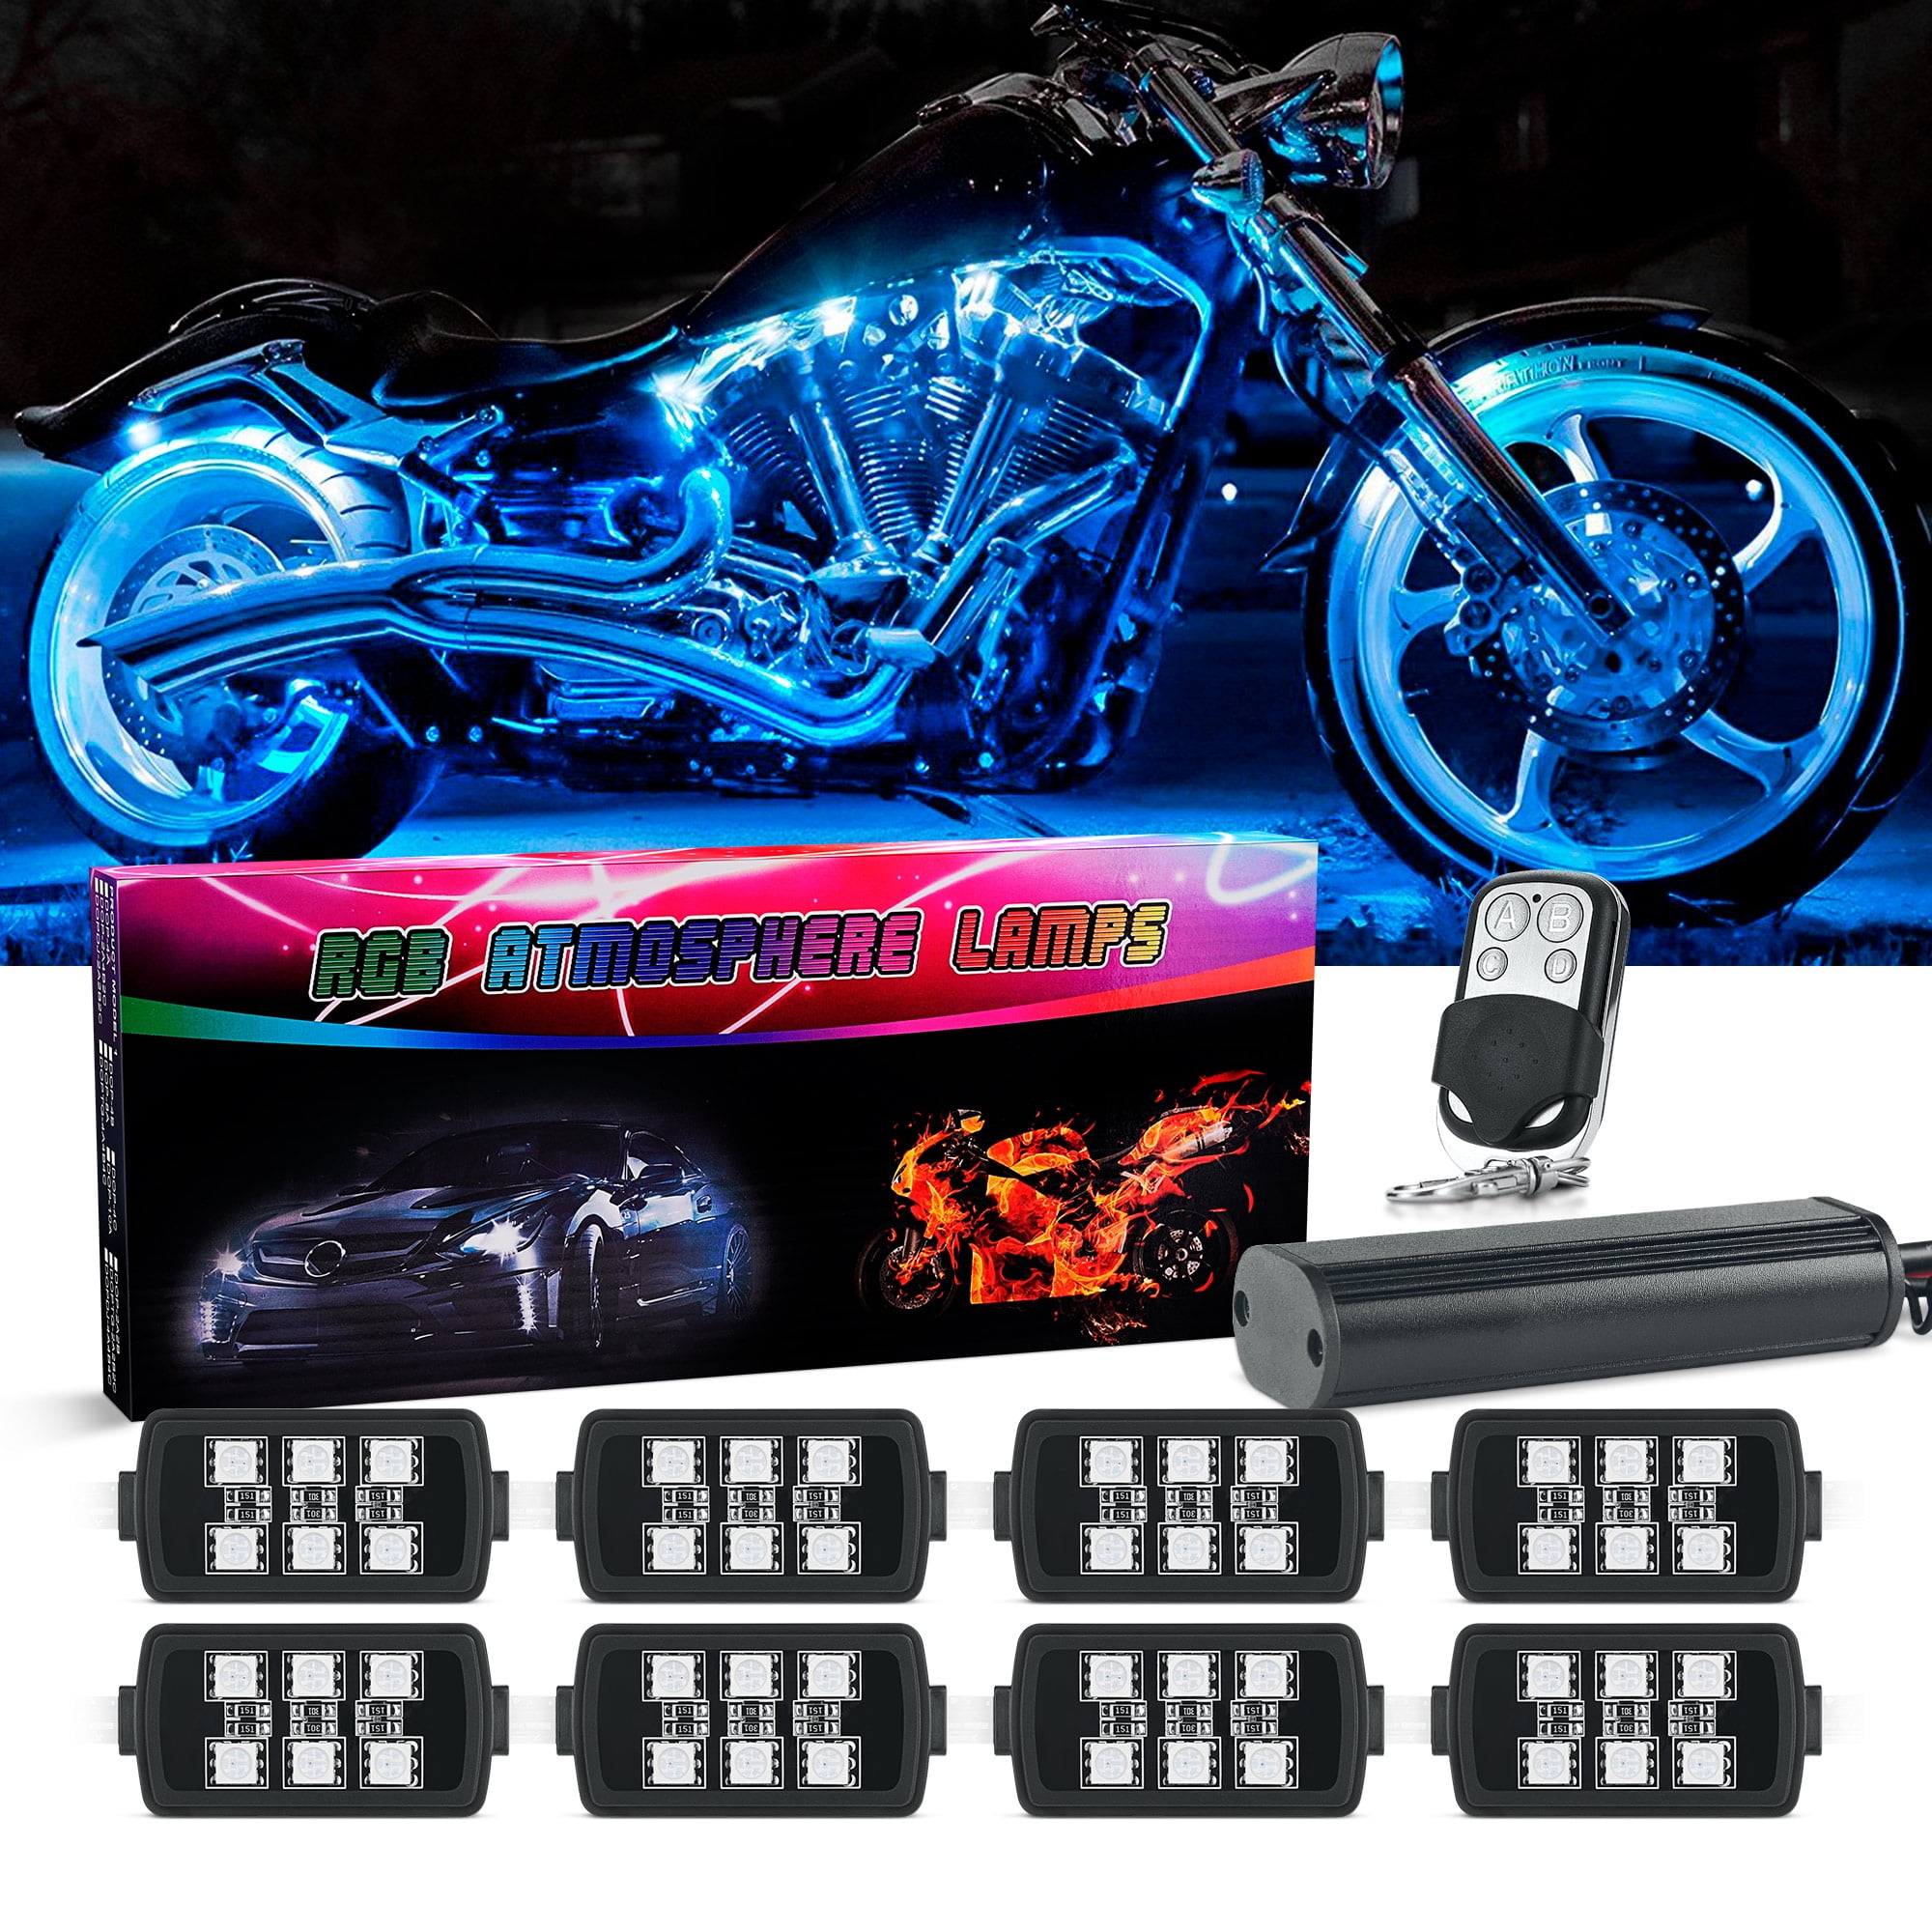 Svin deadlock undskylde MICTUNING 8pcs Motorcycle RGB LED Strip Lights Kit with Brake Light  Function - Multi-Color Underglow LED Accent Glow Neon Lights Waterproof  with 4-Key RF Remote Controller - Walmart.com